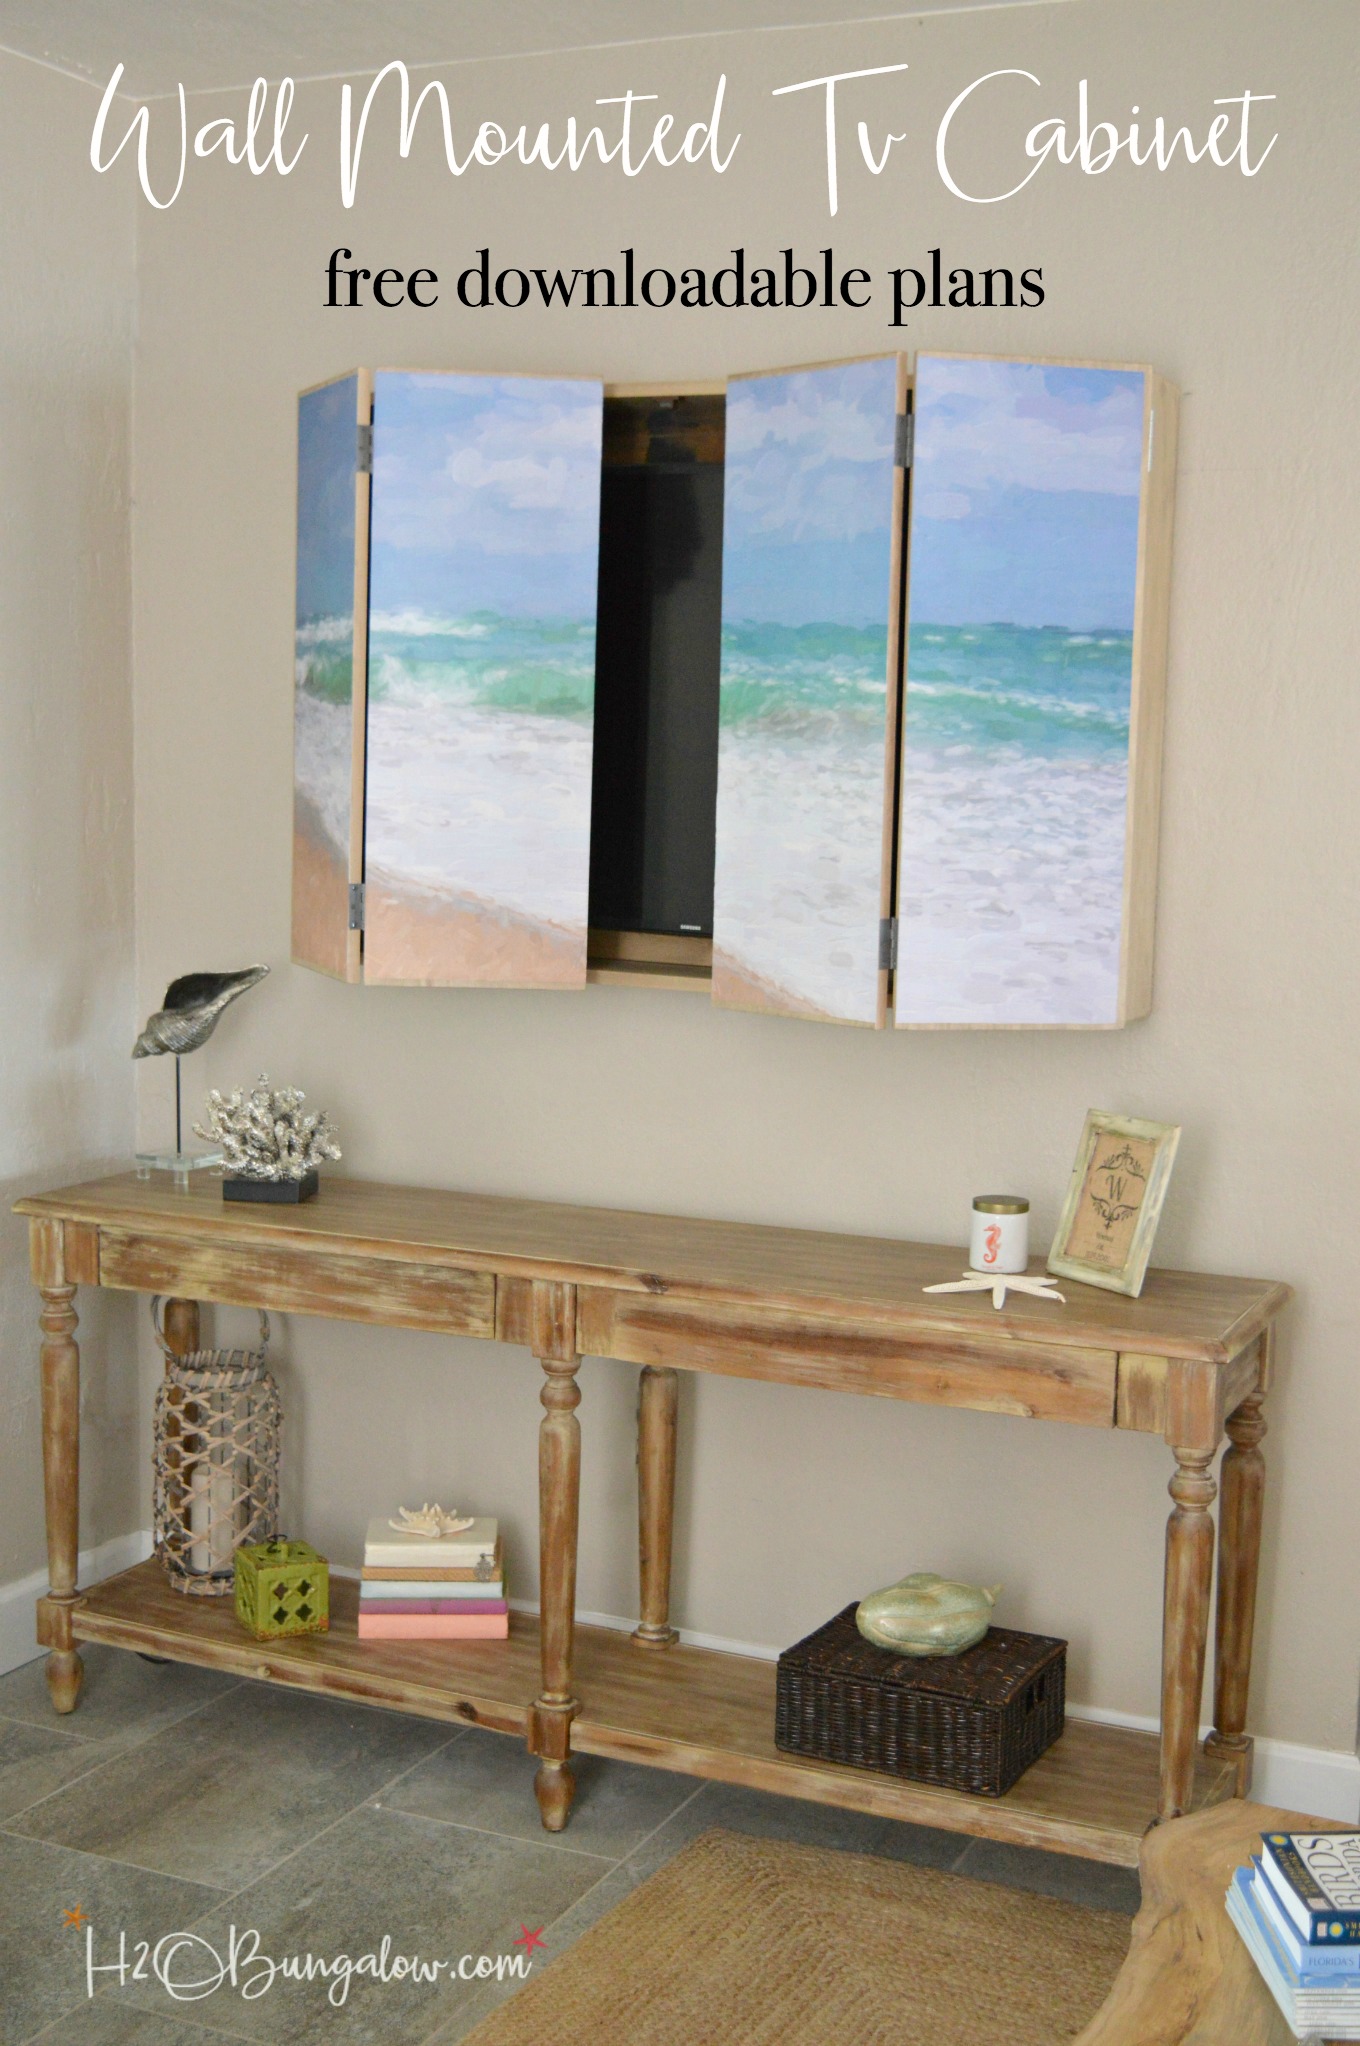 DIY Wall Mounted TV Cabinet with Free Plans - H2OBungalow